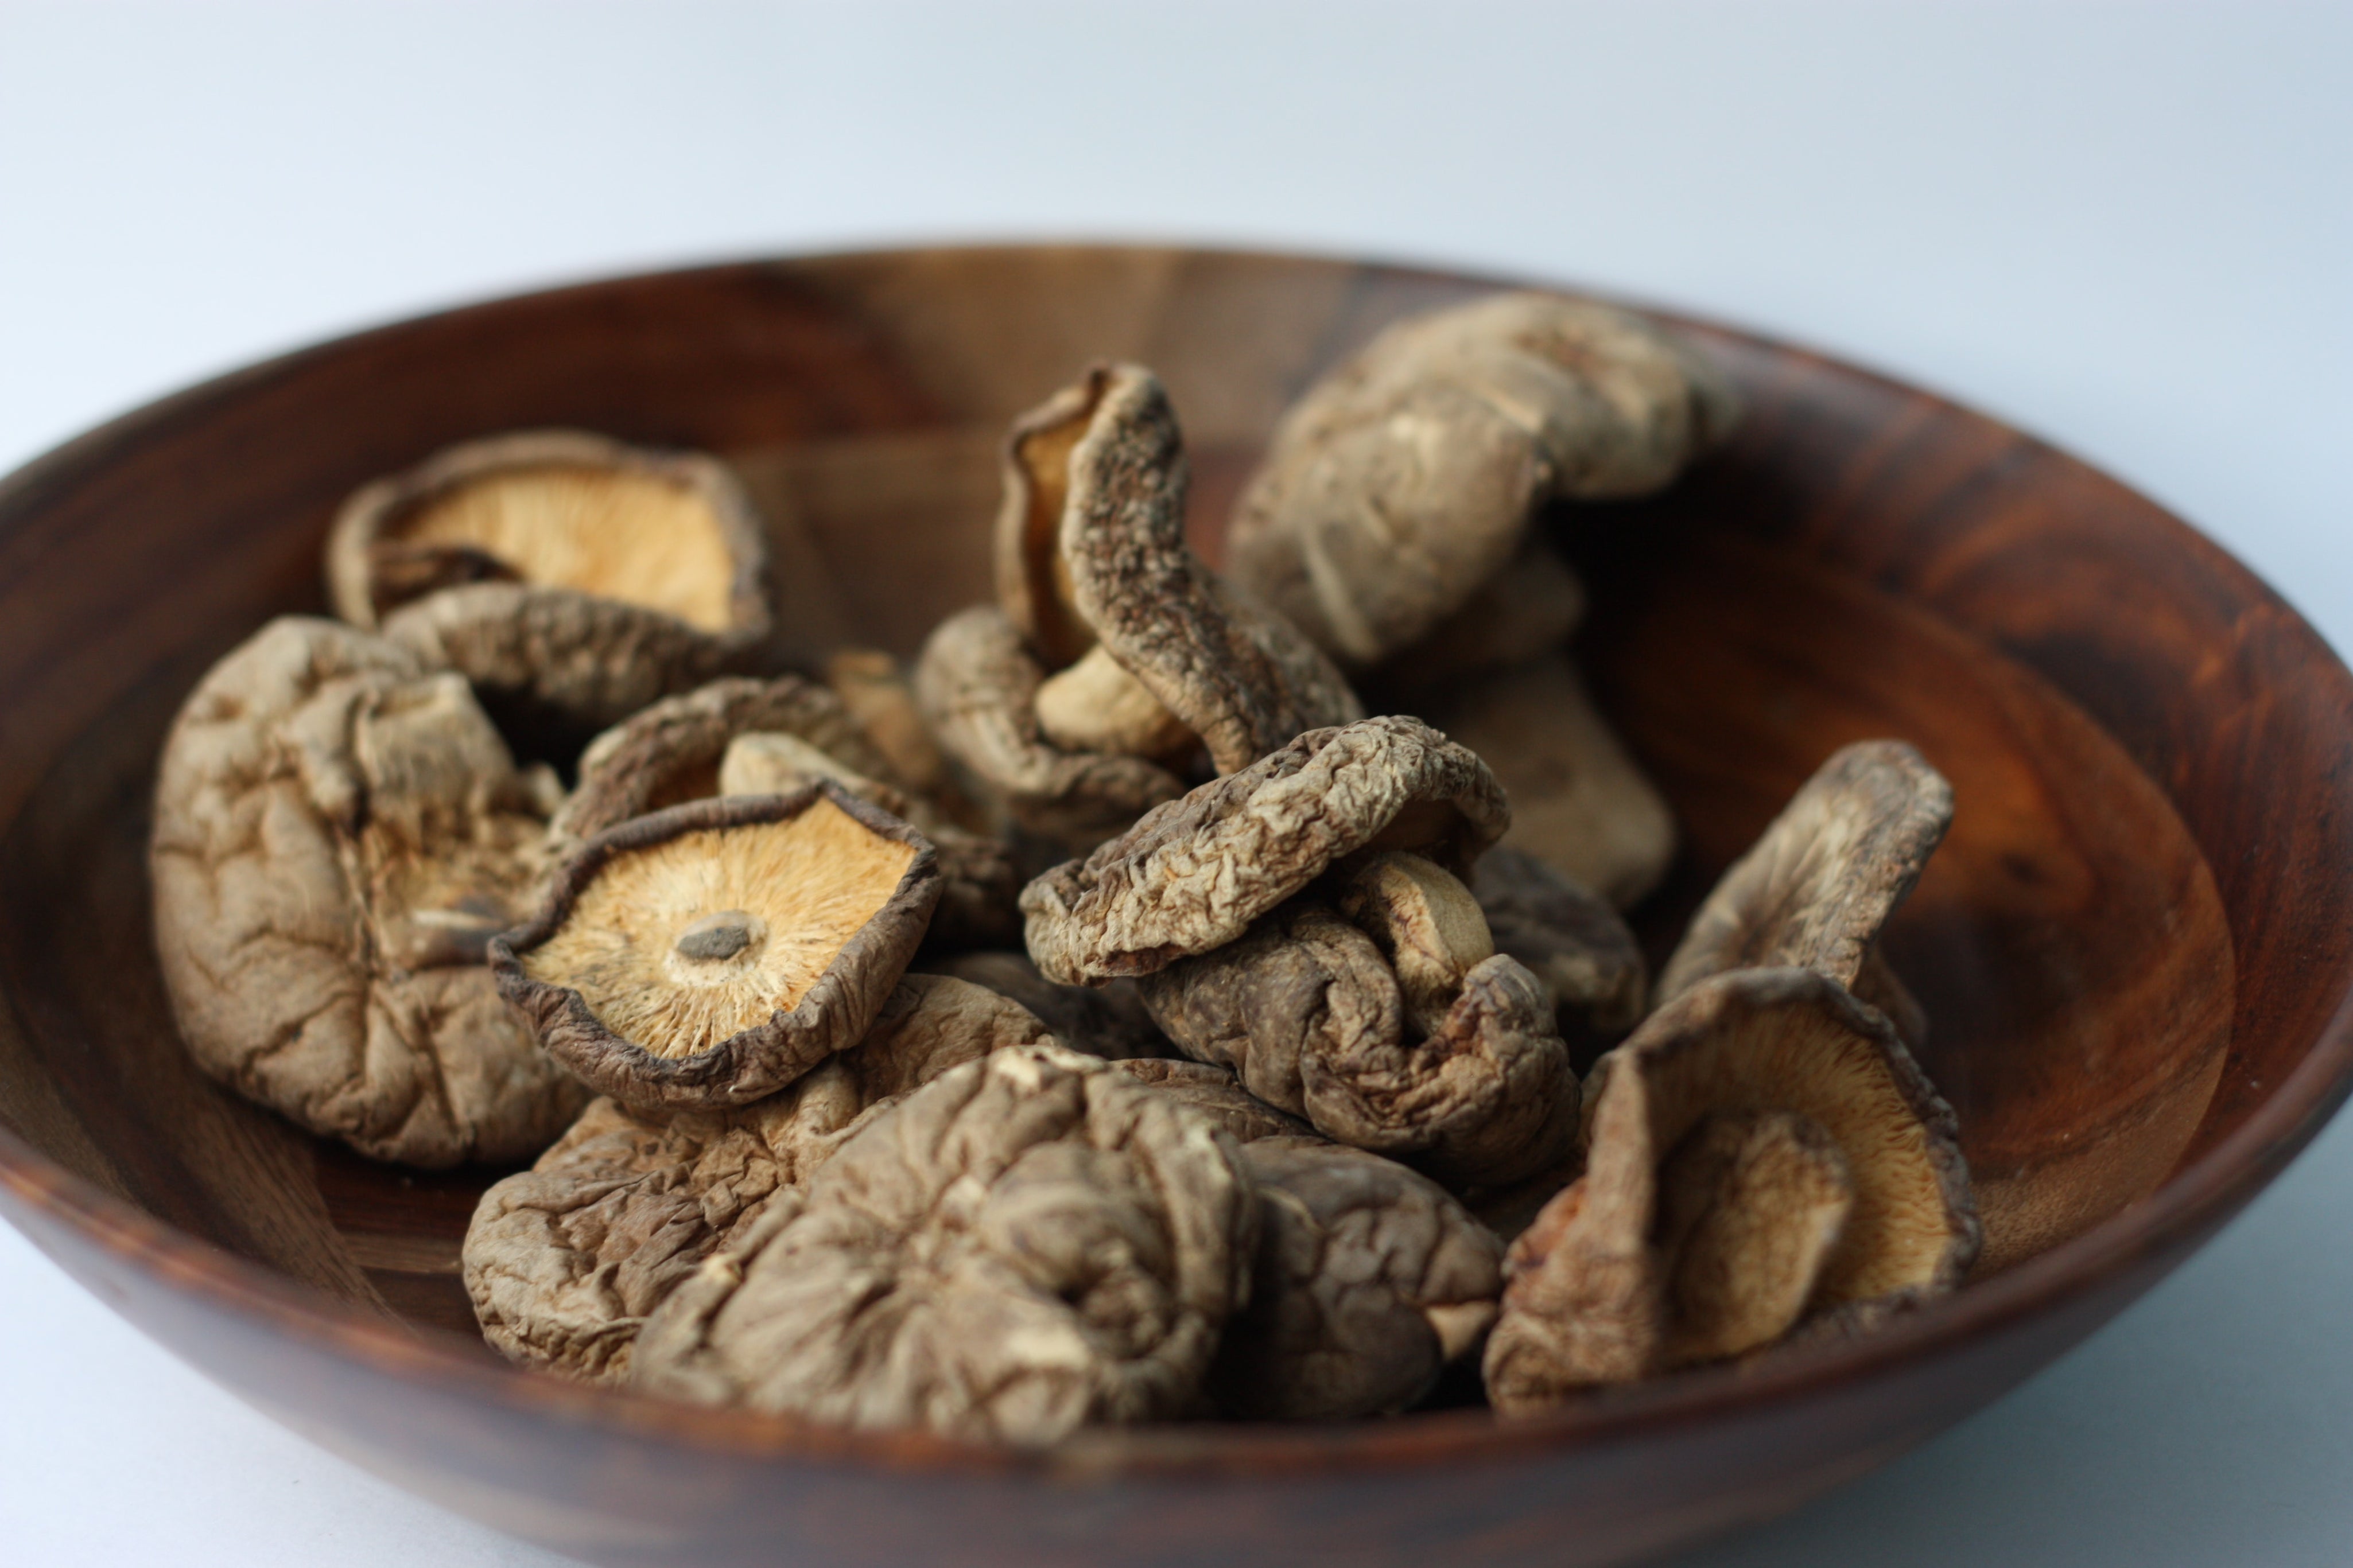 How To Cook Shiitake Mushrooms: Step-by-Step